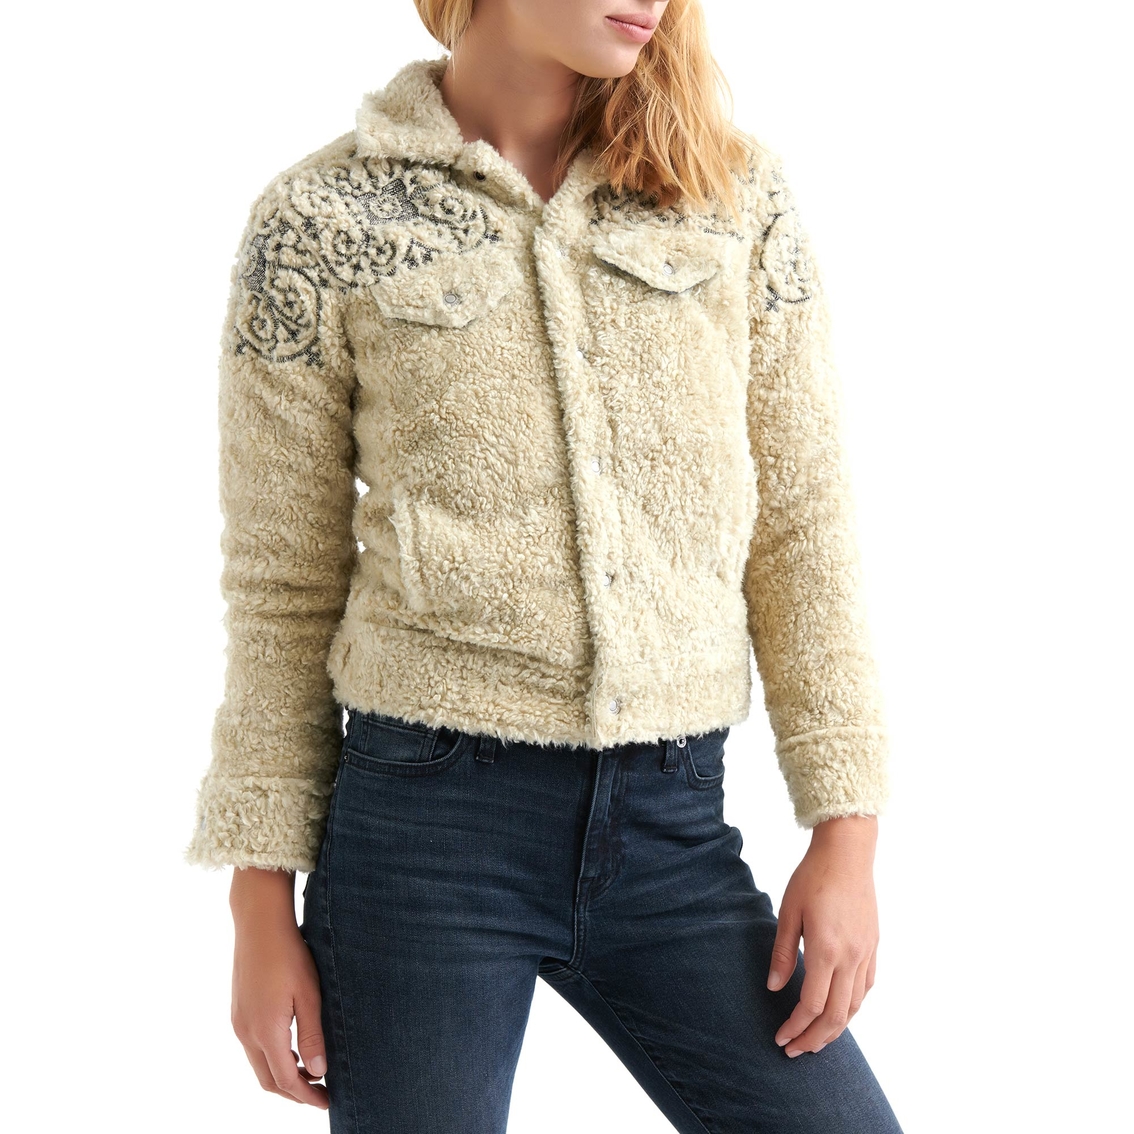 Lucky Brand Sherpa Tomboy Trucker Jacket, Jackets, Clothing & Accessories